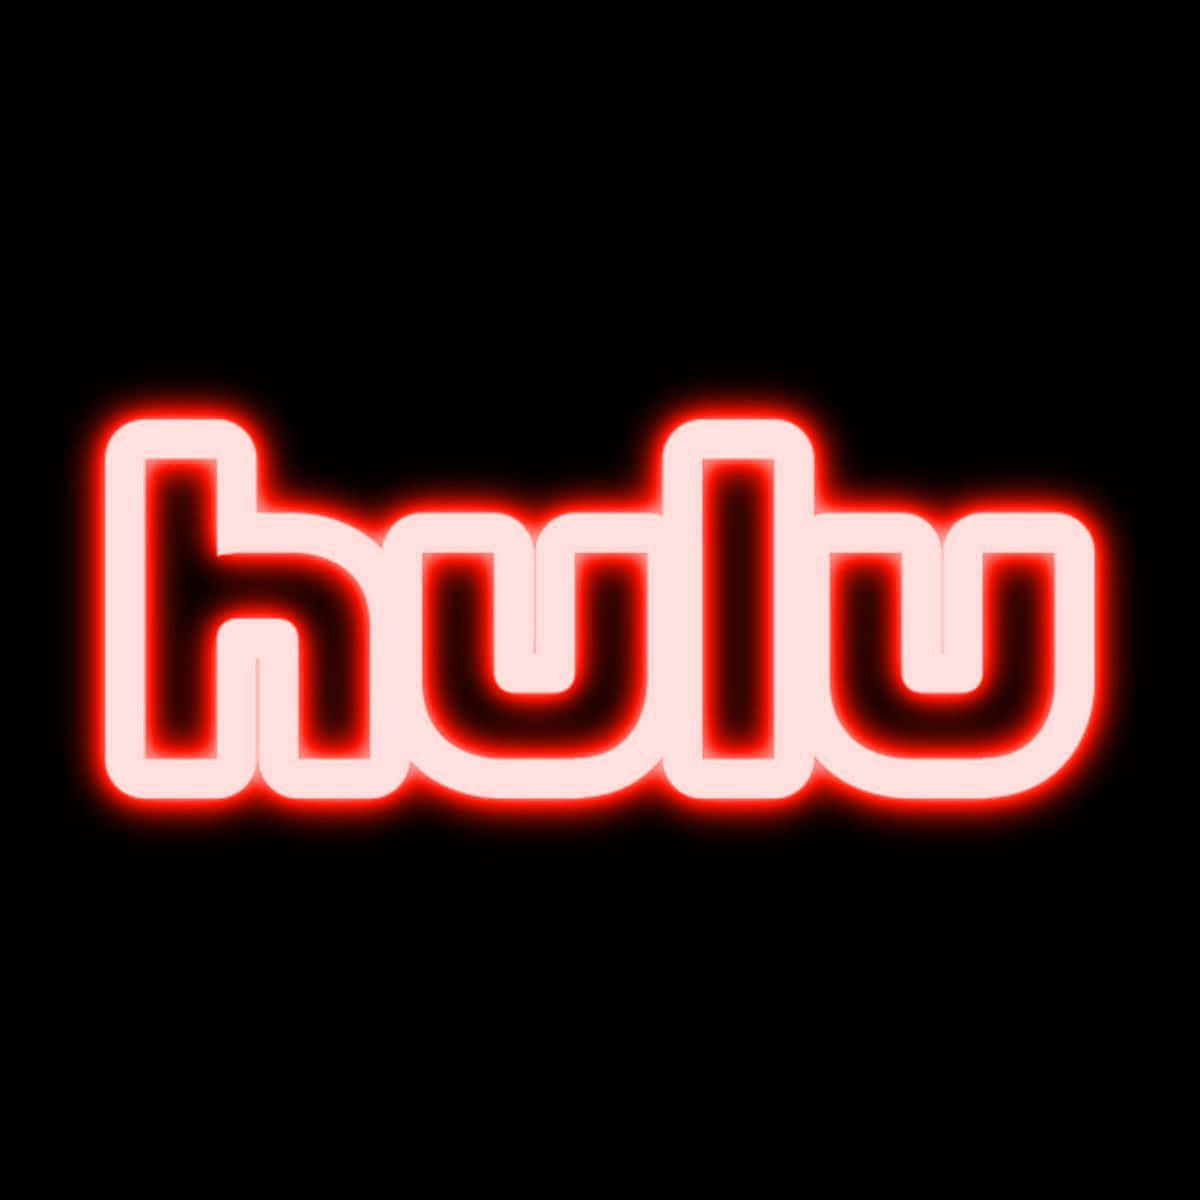 Enjoy the best streaming content with Hulu